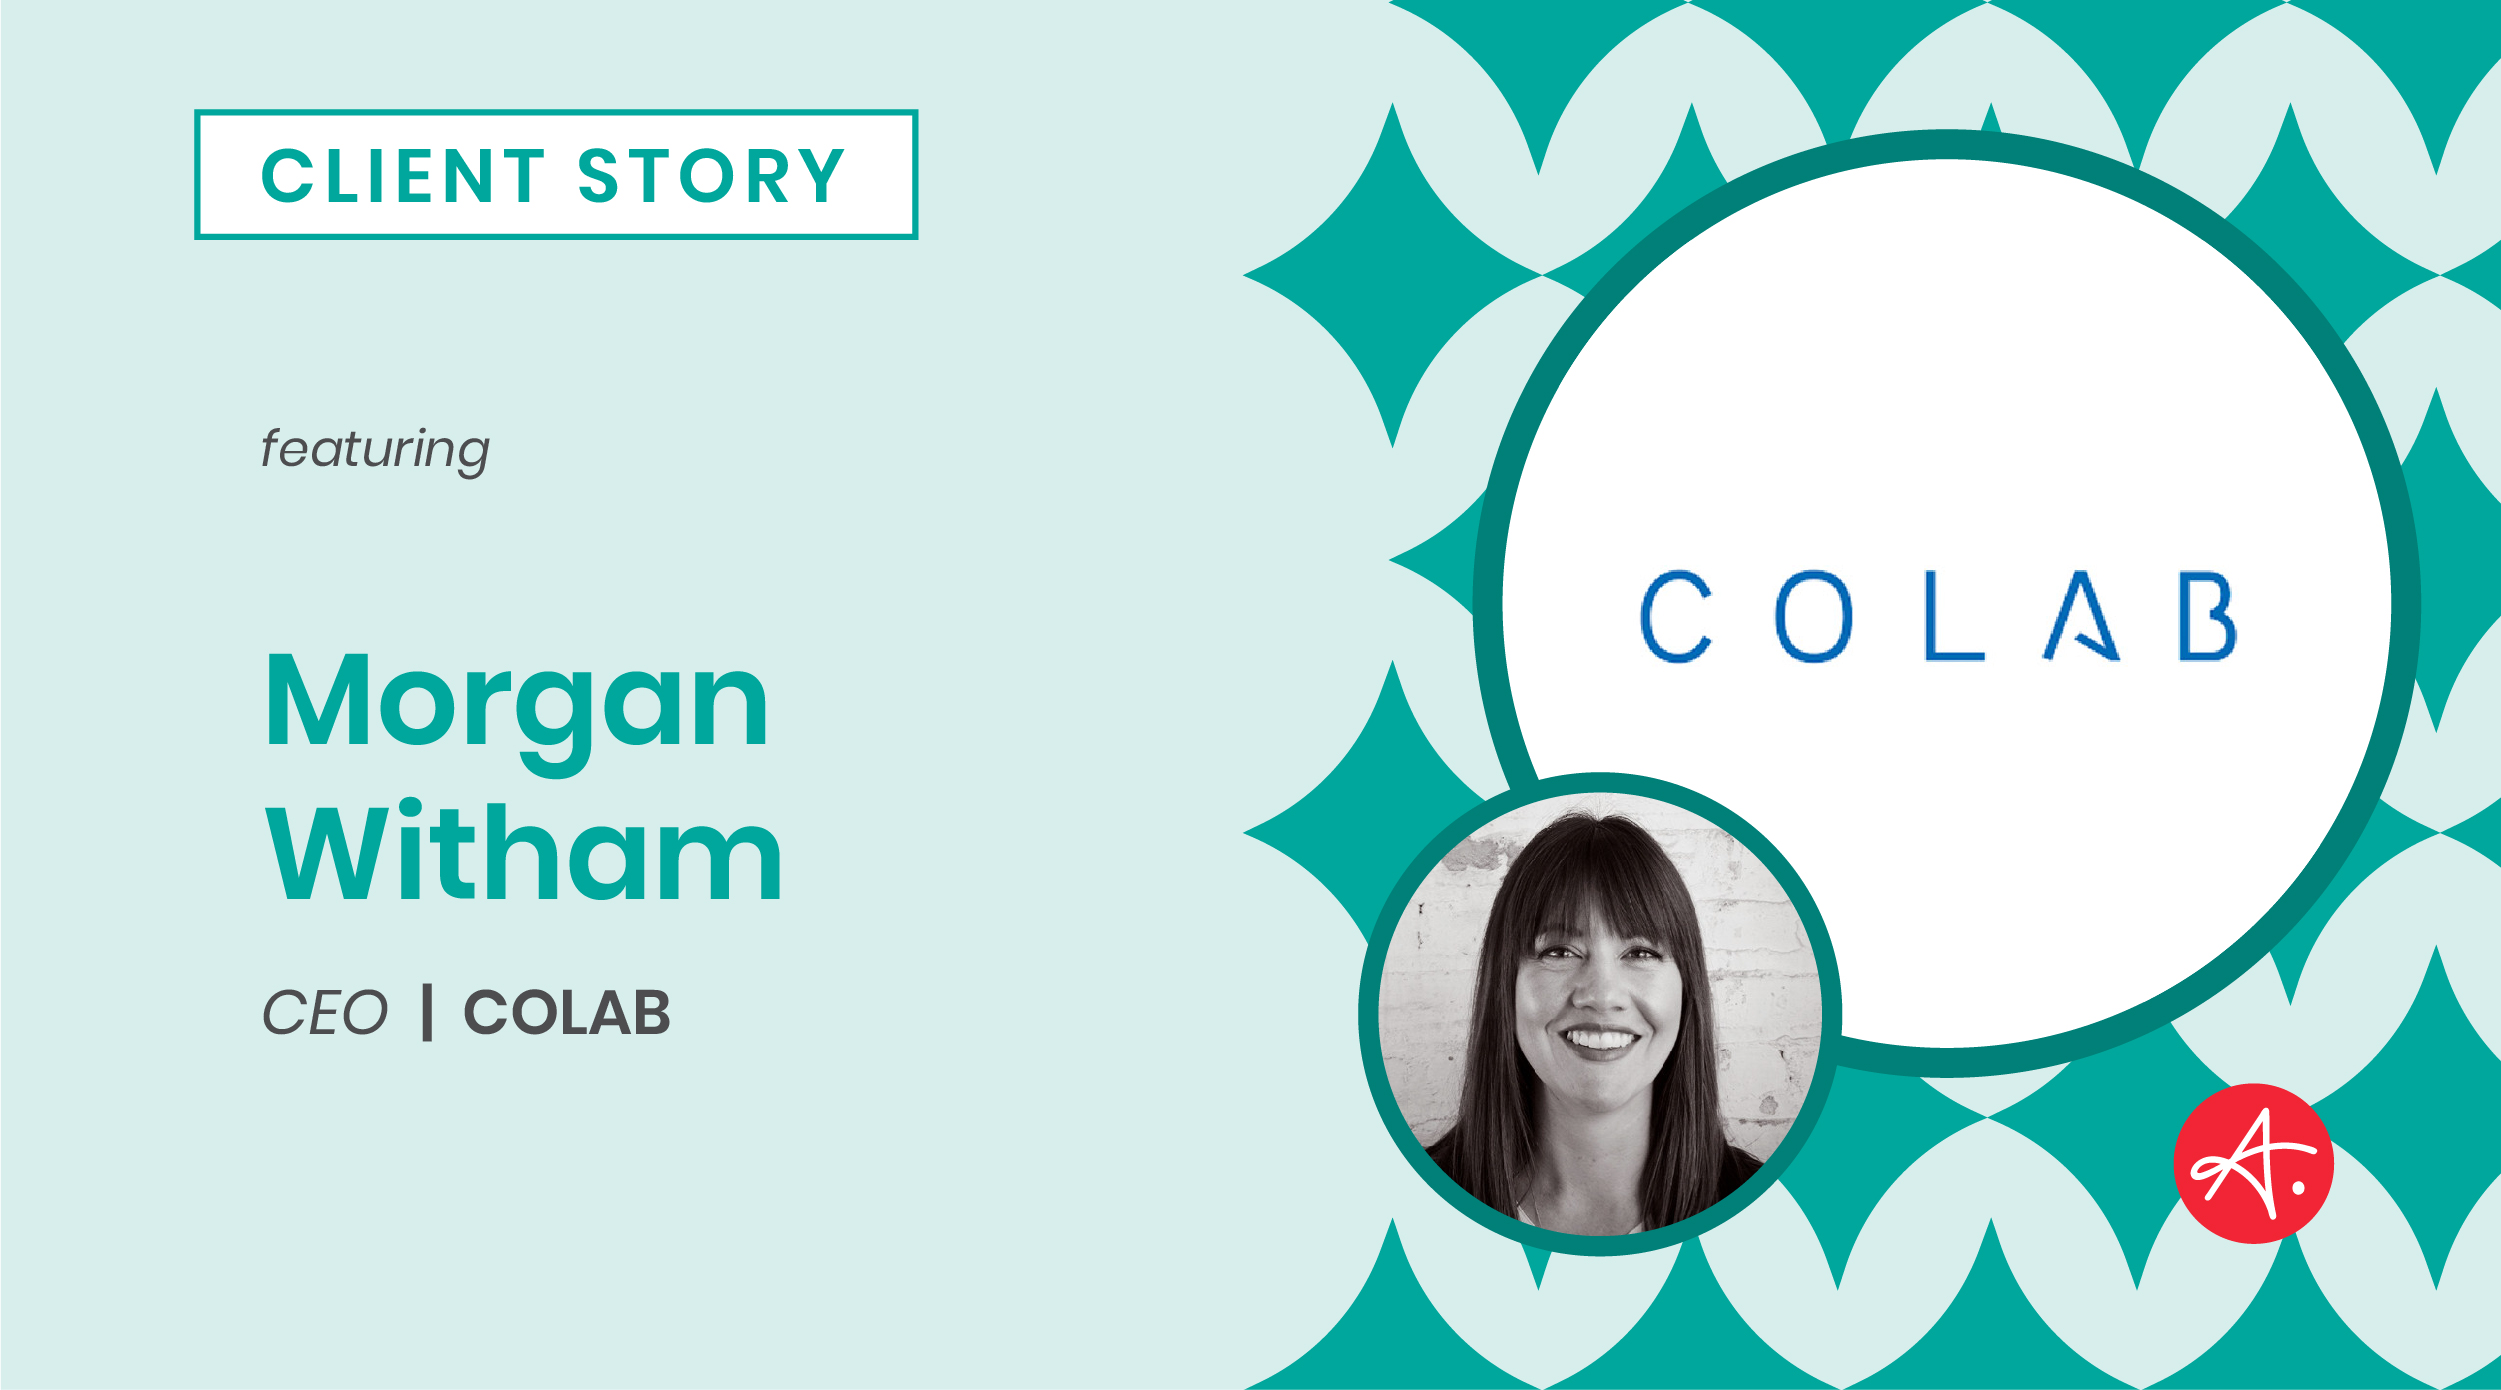 COLAB: Client Story